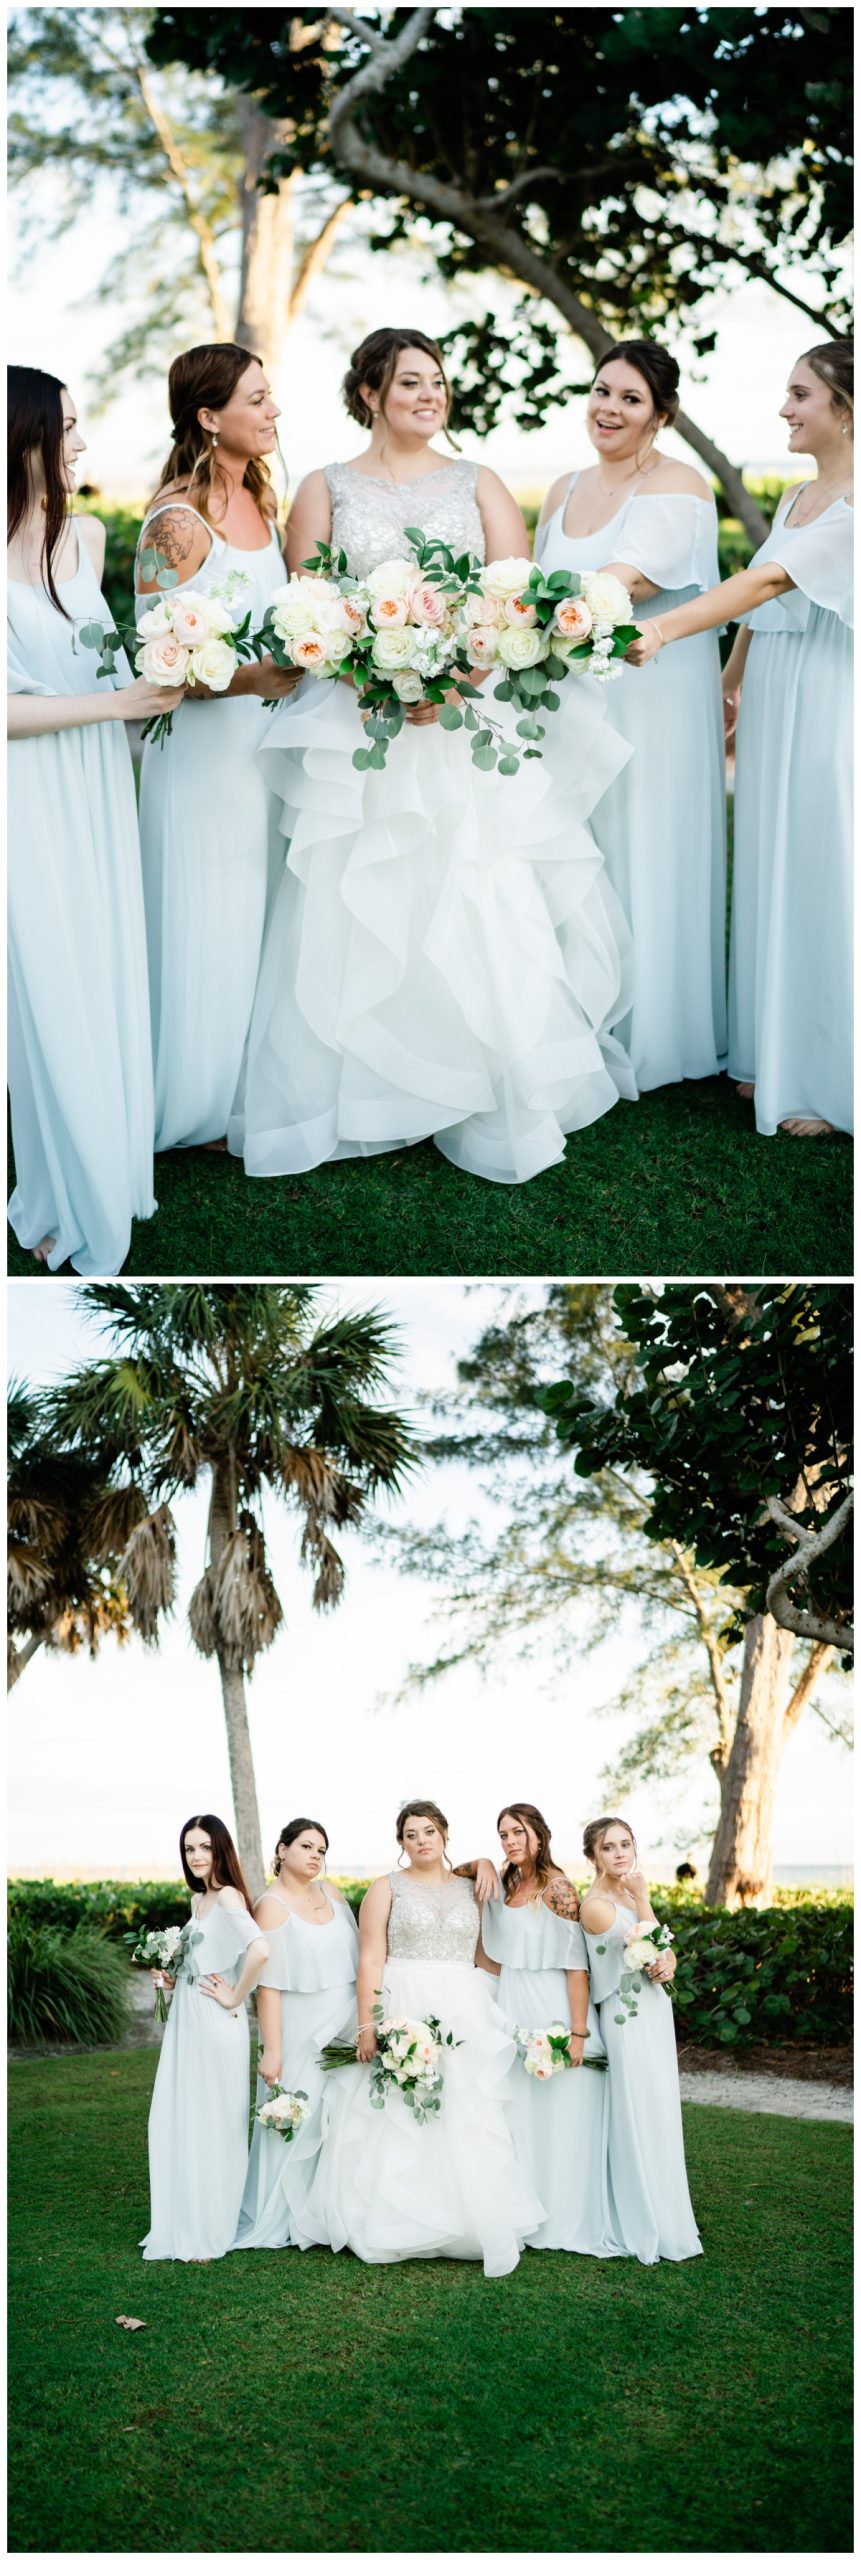 Ice blue bridesmaids attire worn by Florida bridal party. Photographed by Bonita Springs wedding photographer